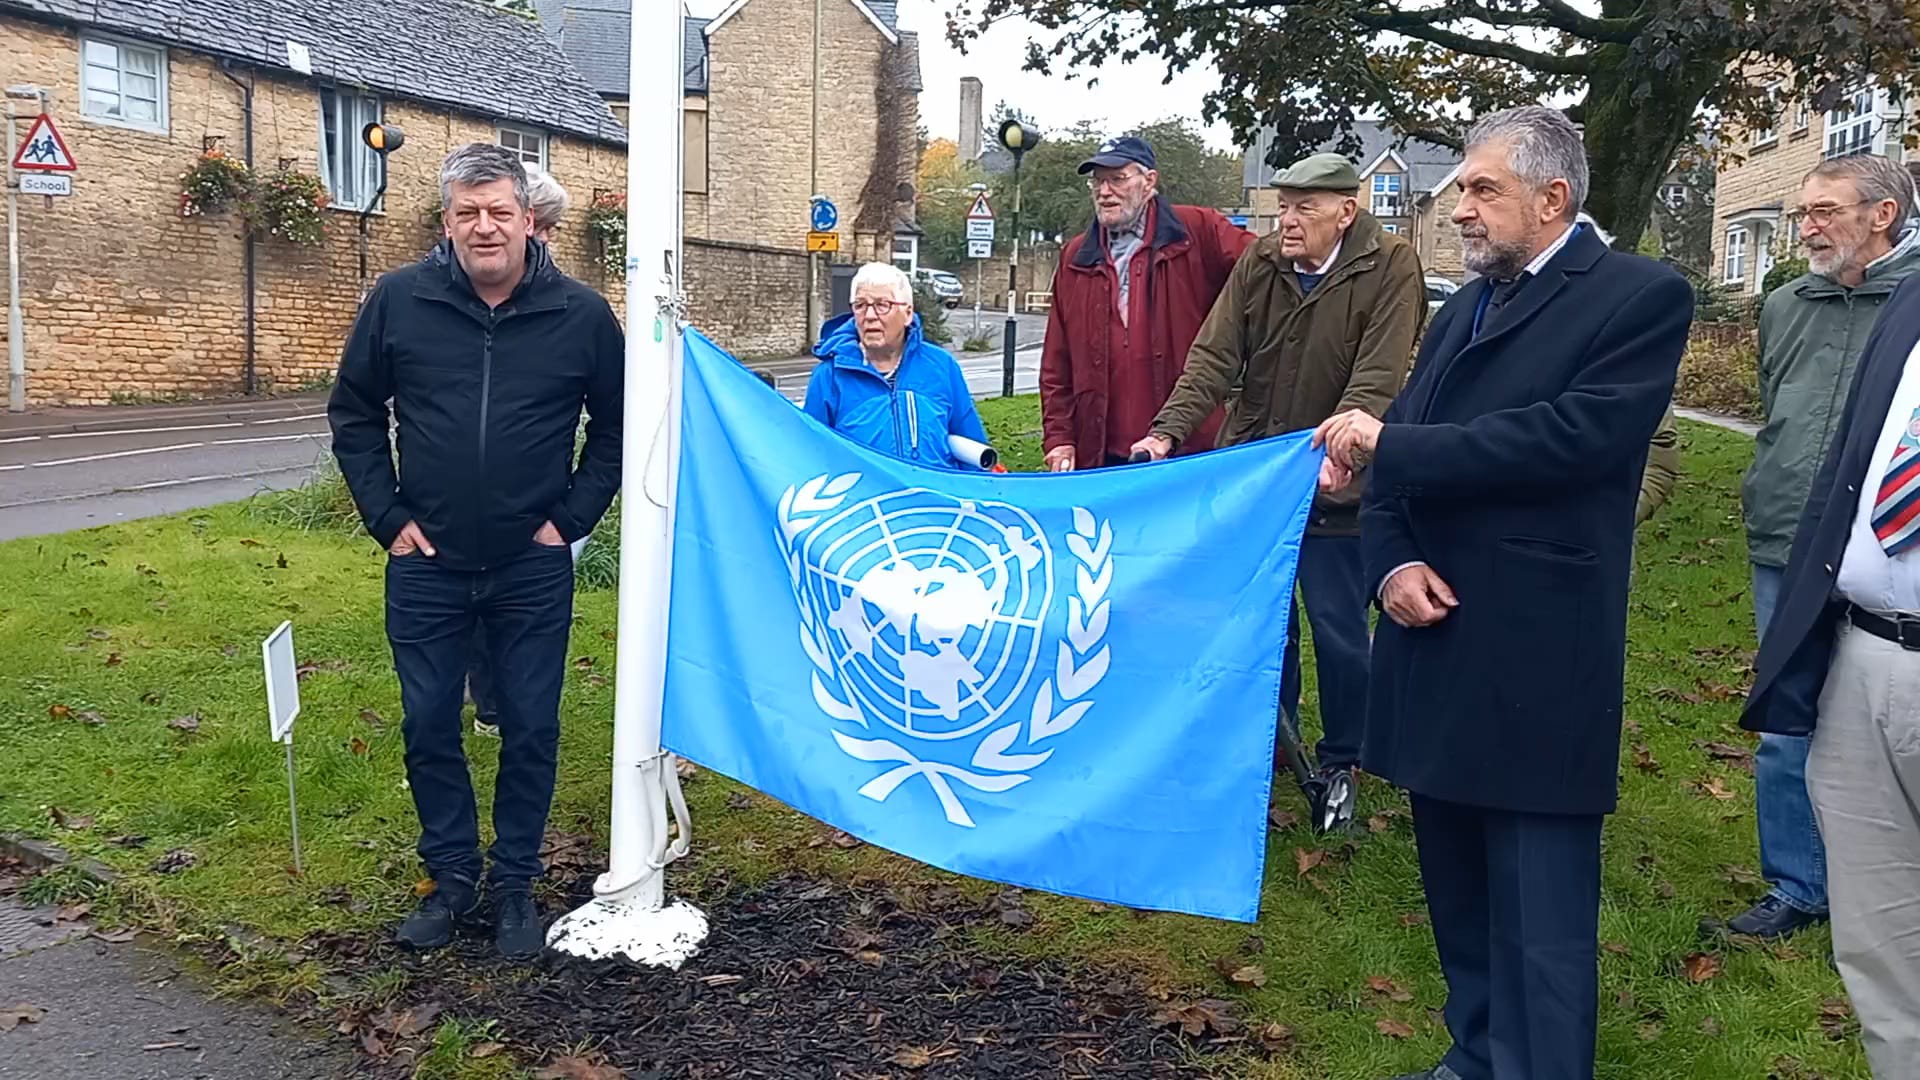 Members of Chipping Norton Amnesty and Chipping Norton Town Council with the UN flag